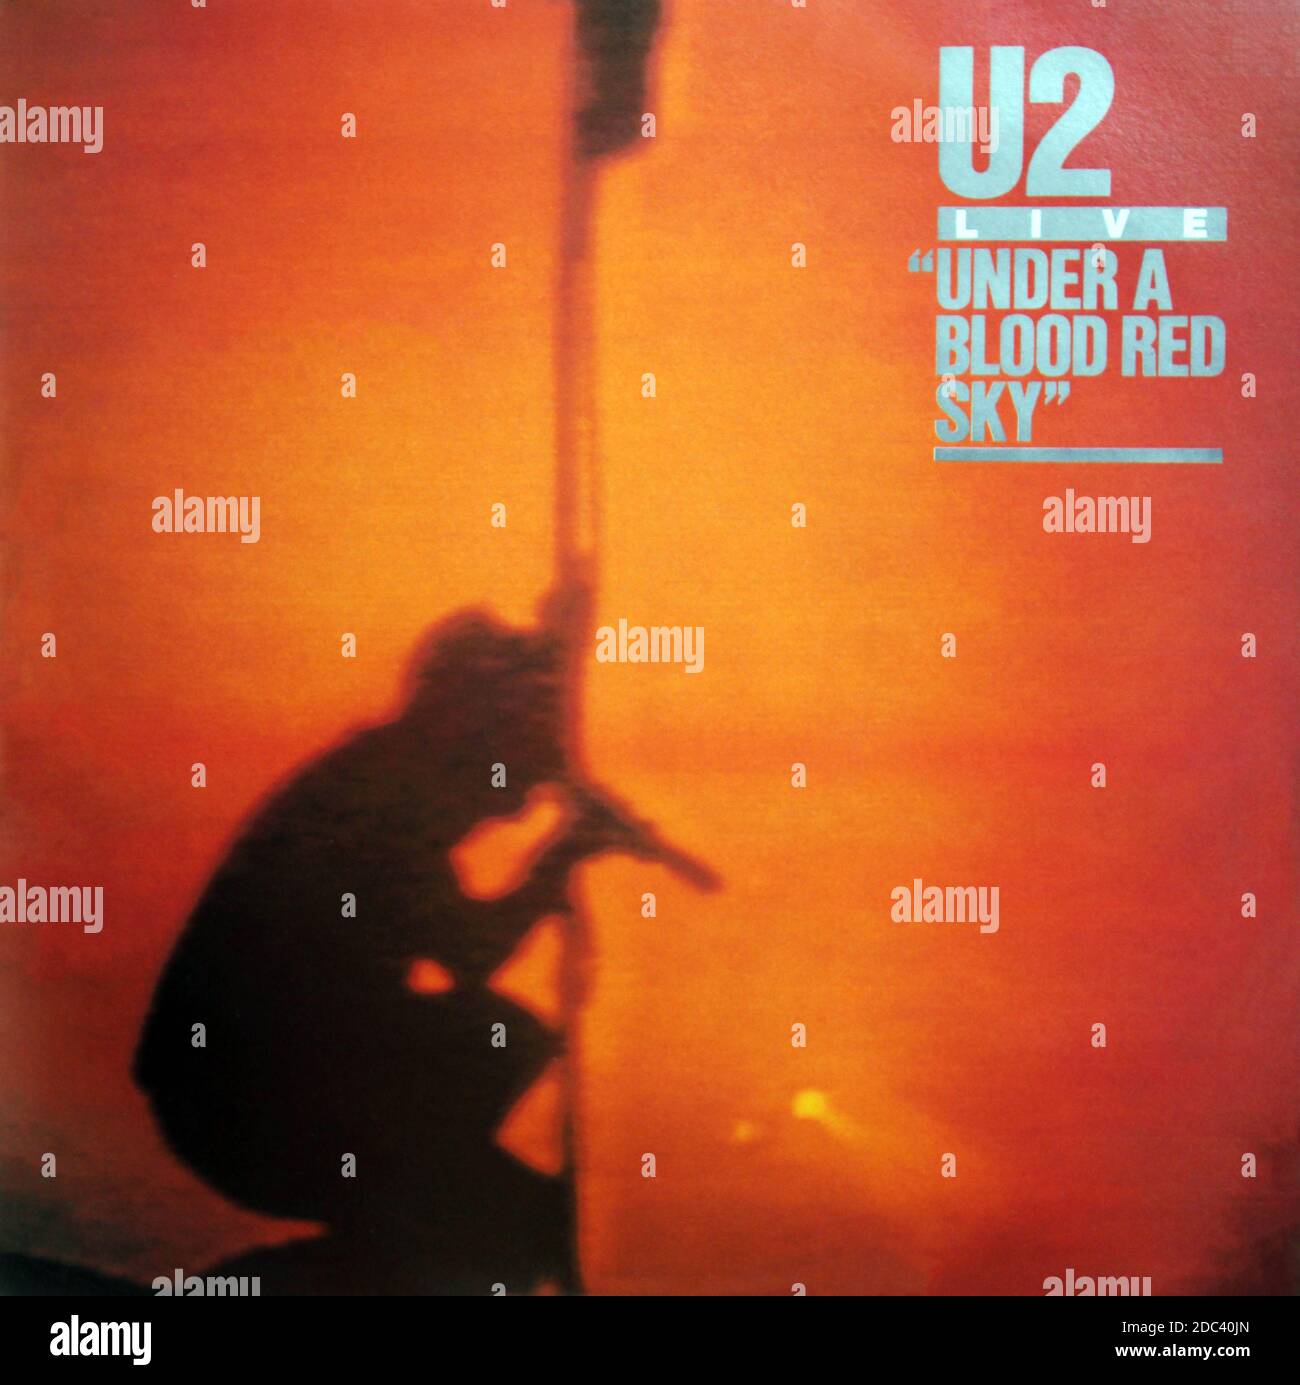 U2: LP front cover 'Under A Blood Red Sky/Live' Stock Photo